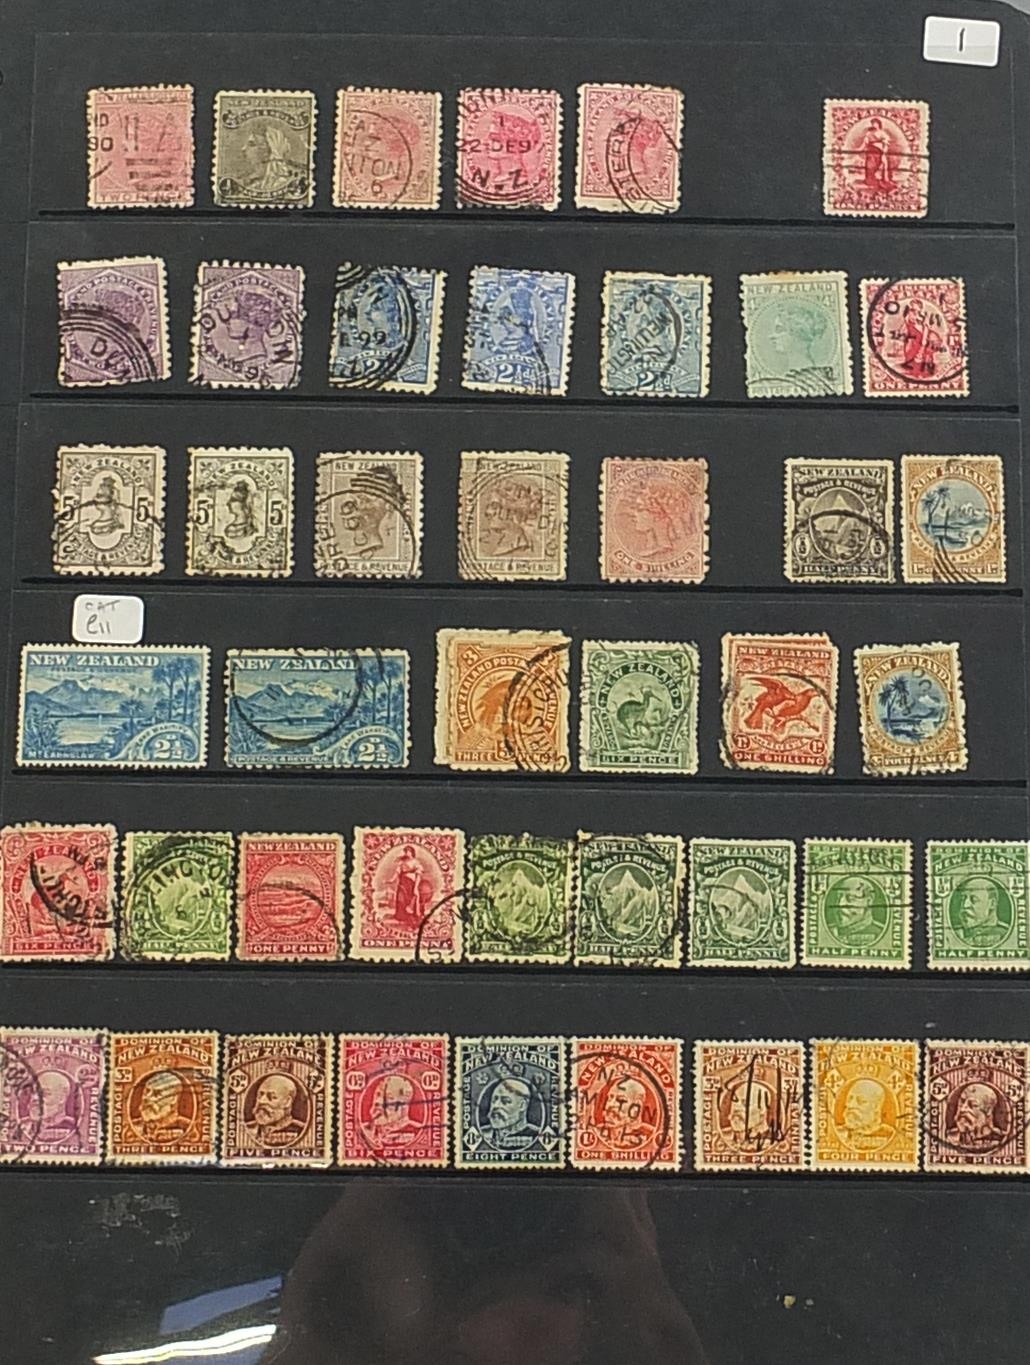 Collection of New Zealand stamps arranged in an album including Queen Victoria